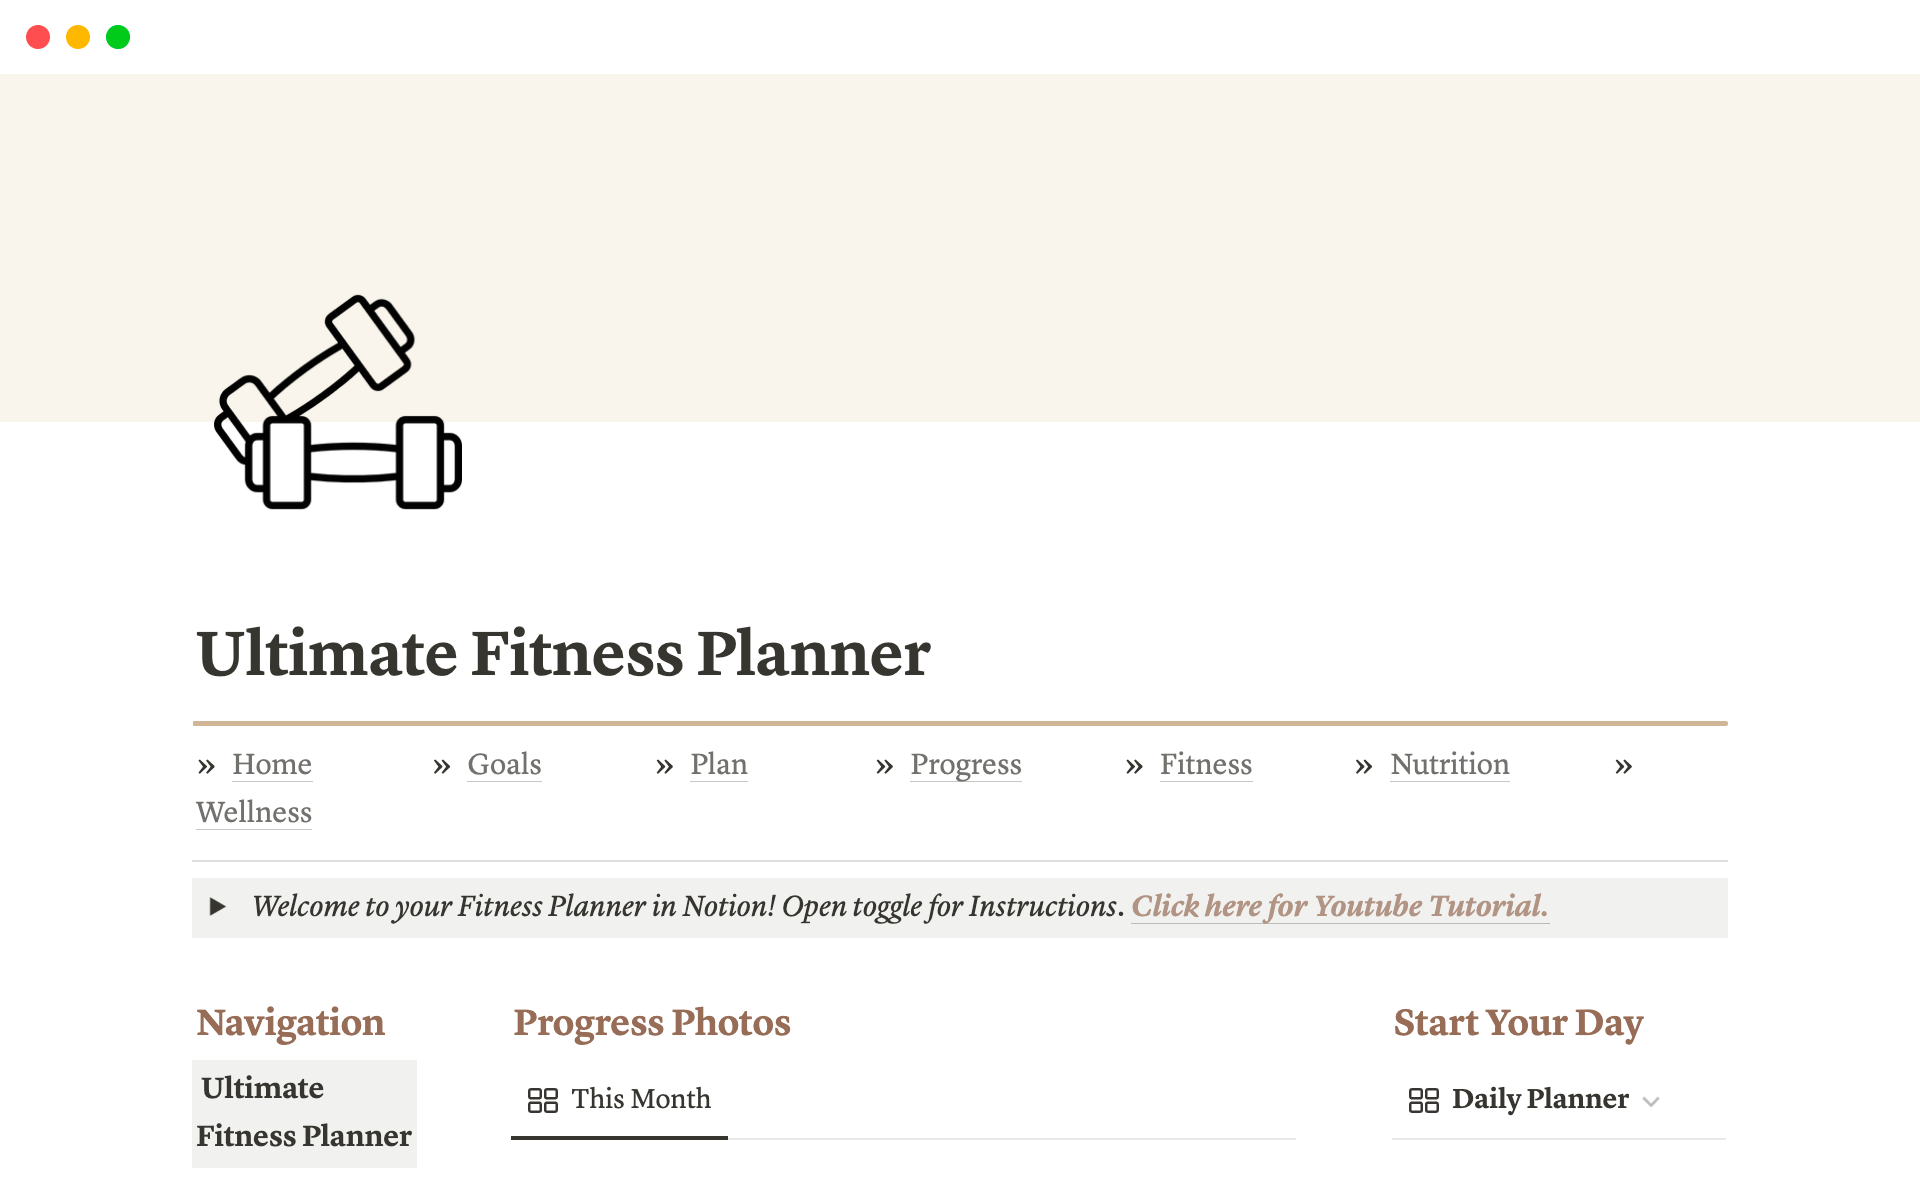 The ultimate Notion template to help you stay fit and motivated, plan your nutrition, and track your wellbeing.